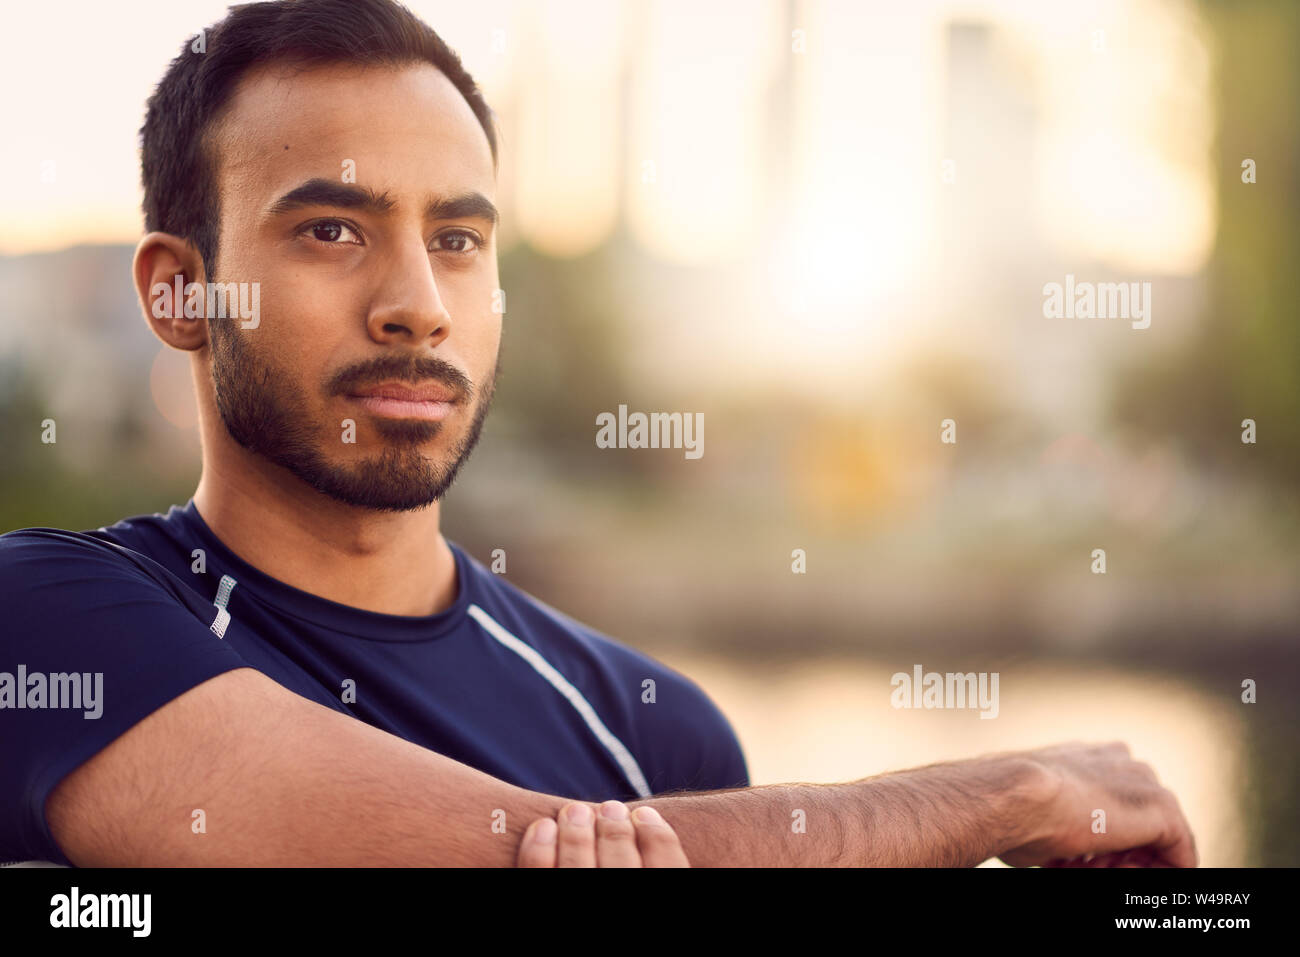 Portrait of active millenial man jogging at dusk with an urban cityscape and sunset in the background Stock Photo